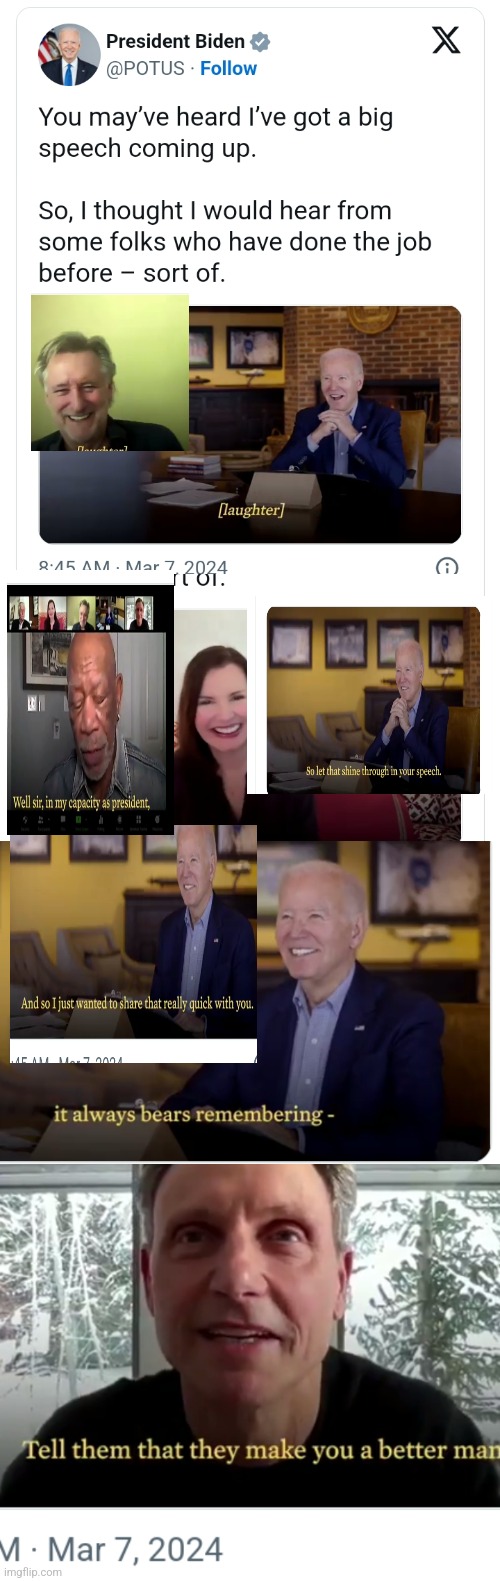 Actors and 1 puppet | image tagged in creepy joe biden,funny,funny memes | made w/ Imgflip meme maker